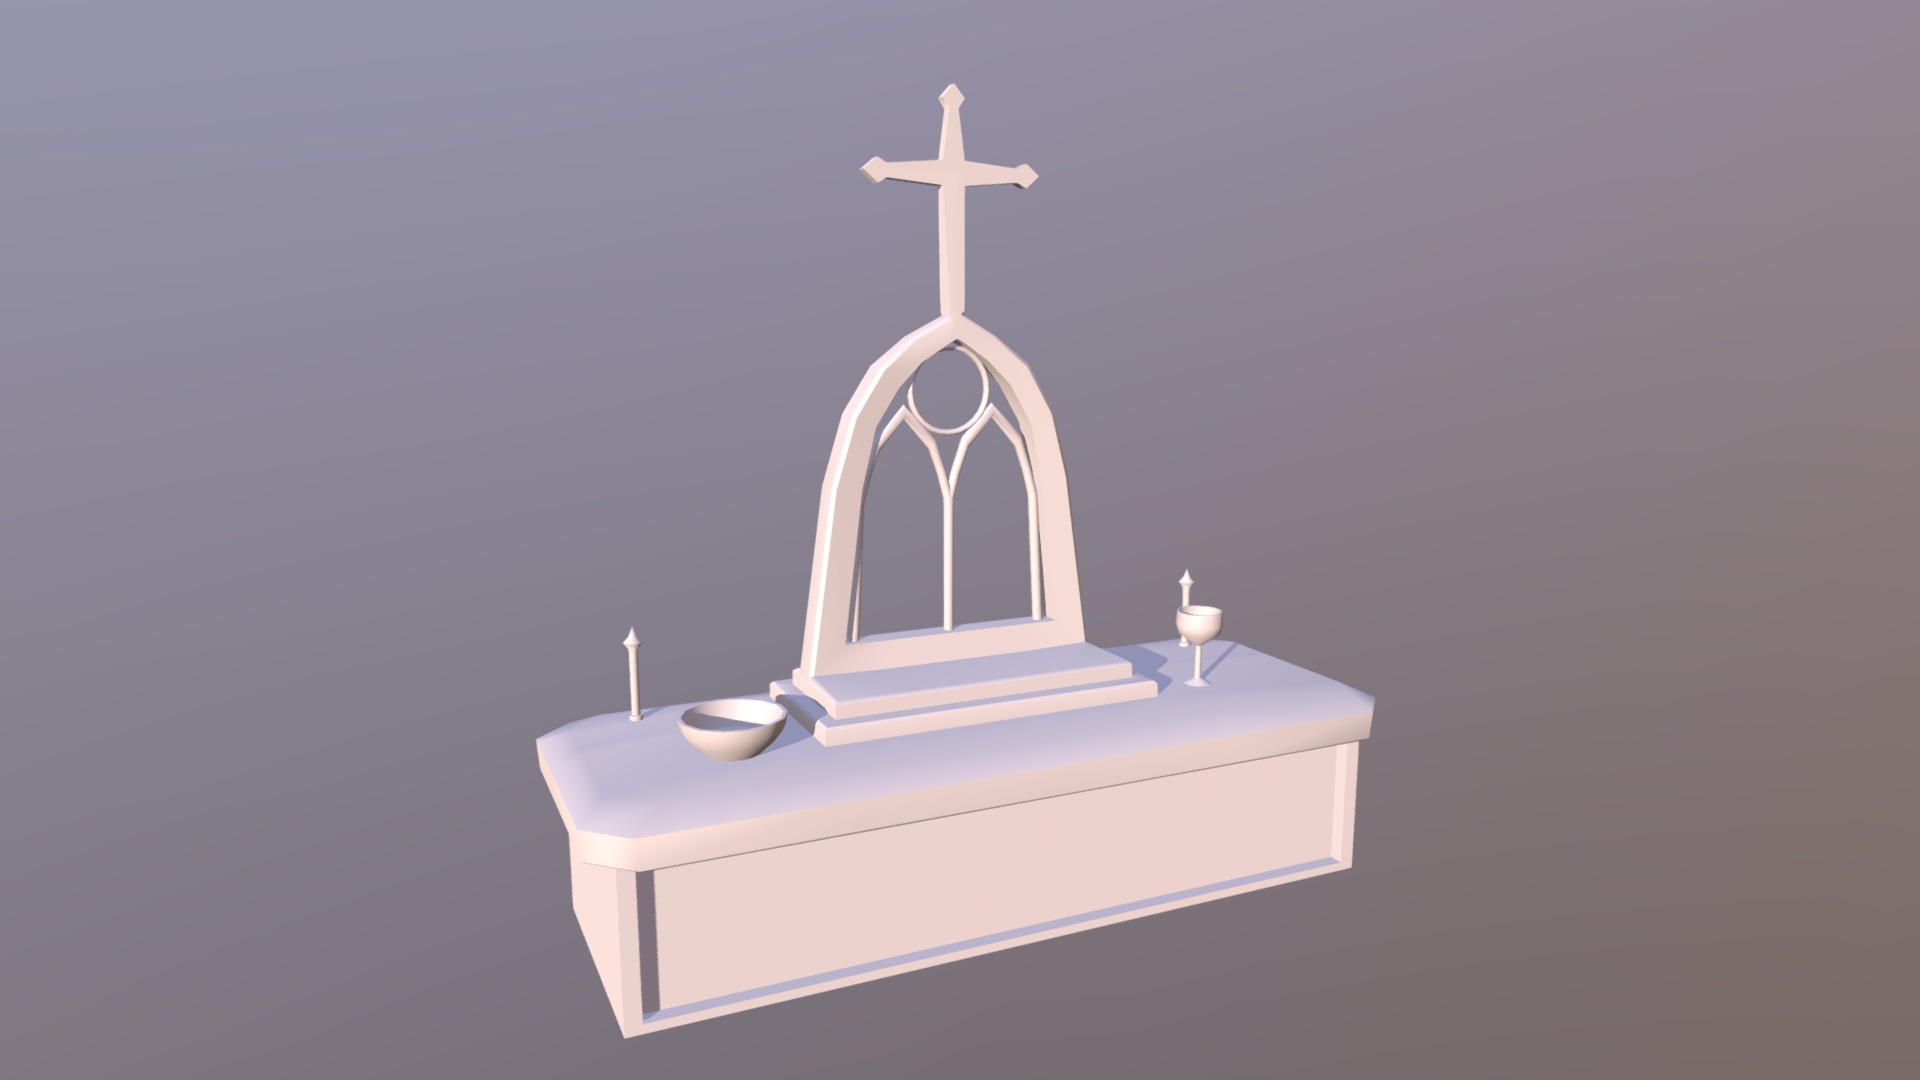 More props for our uppcoming school project! - Church Altar - 3D model by Sara Frid (@Pixeluna) 3d model